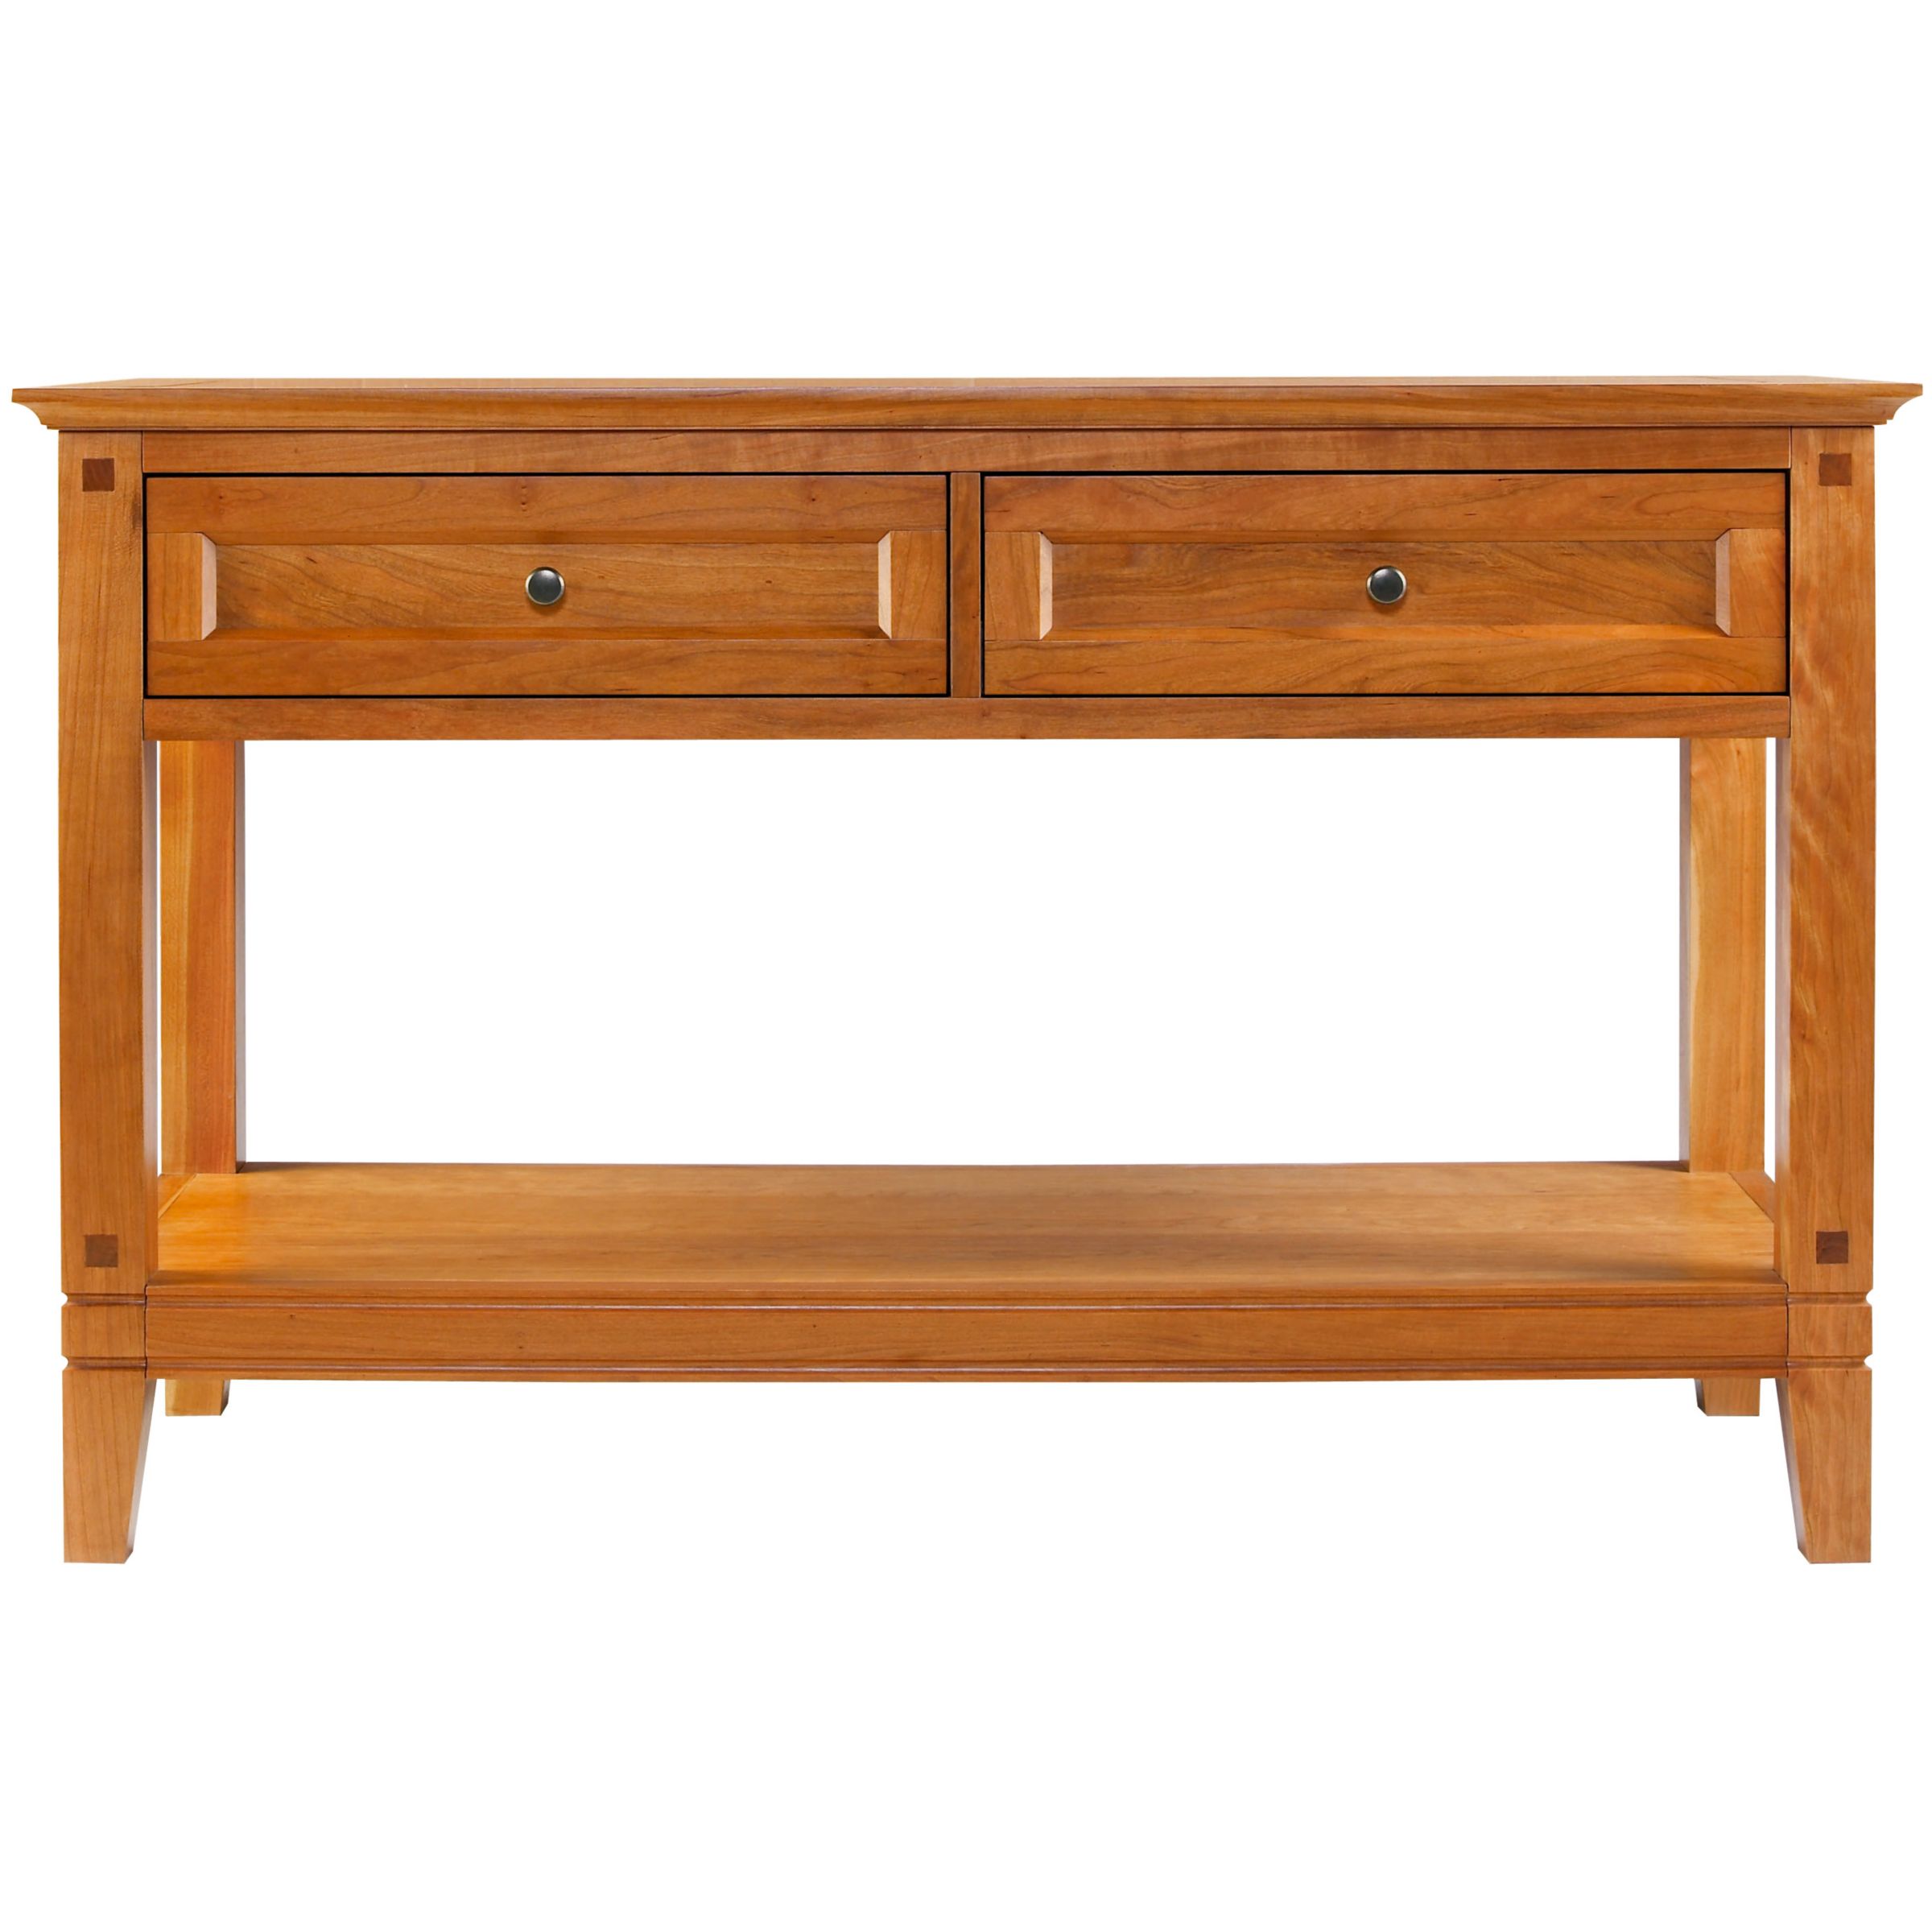 John Lewis Stowe Console Table